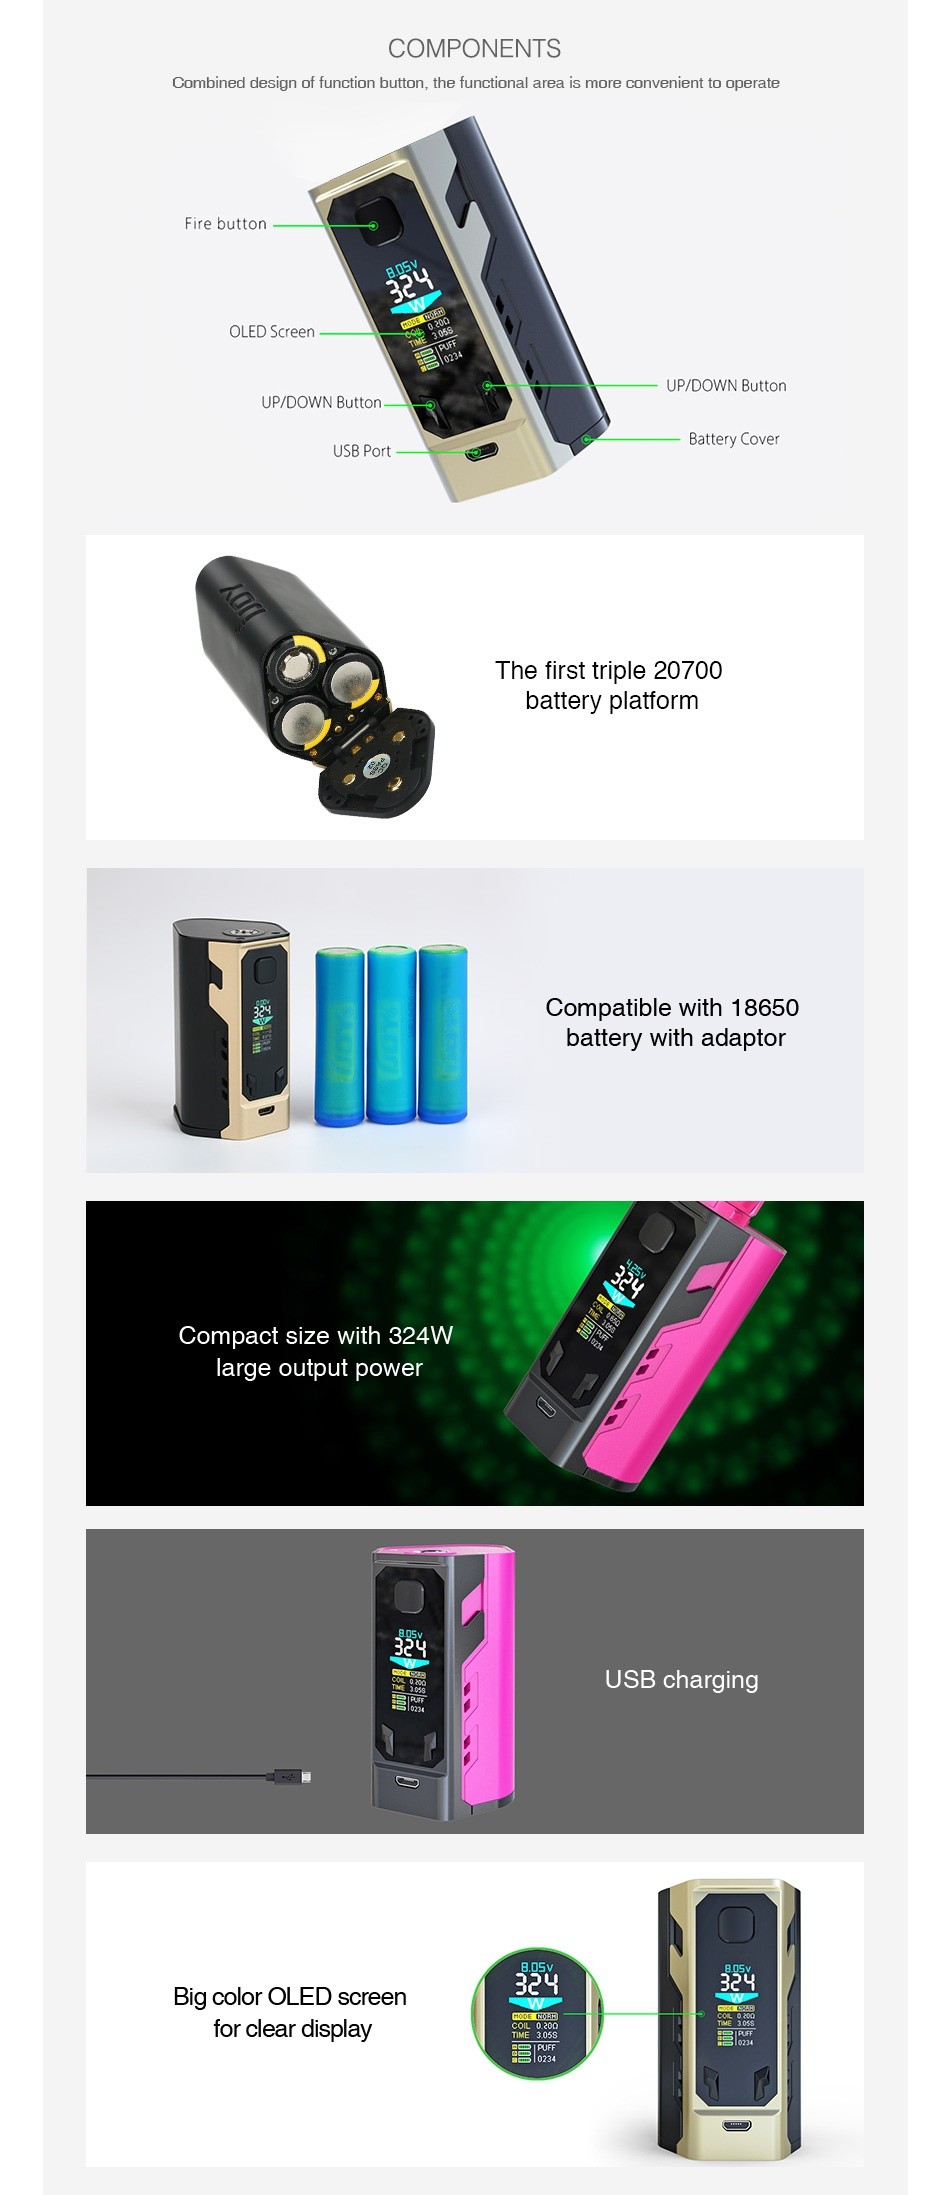 IJOY Captain X3 324W 20700 TC MOD 9000mAh COMPONENTS Combined design of function button the functional area is more convenient to operate Fire button OLED Screen UP DOWN Button UP DOWN Button The first triple 20700 battery platform Compatible with 18650 battery with adaptor Compact size with 324W large output power USB charging Big color OLED screen clear display